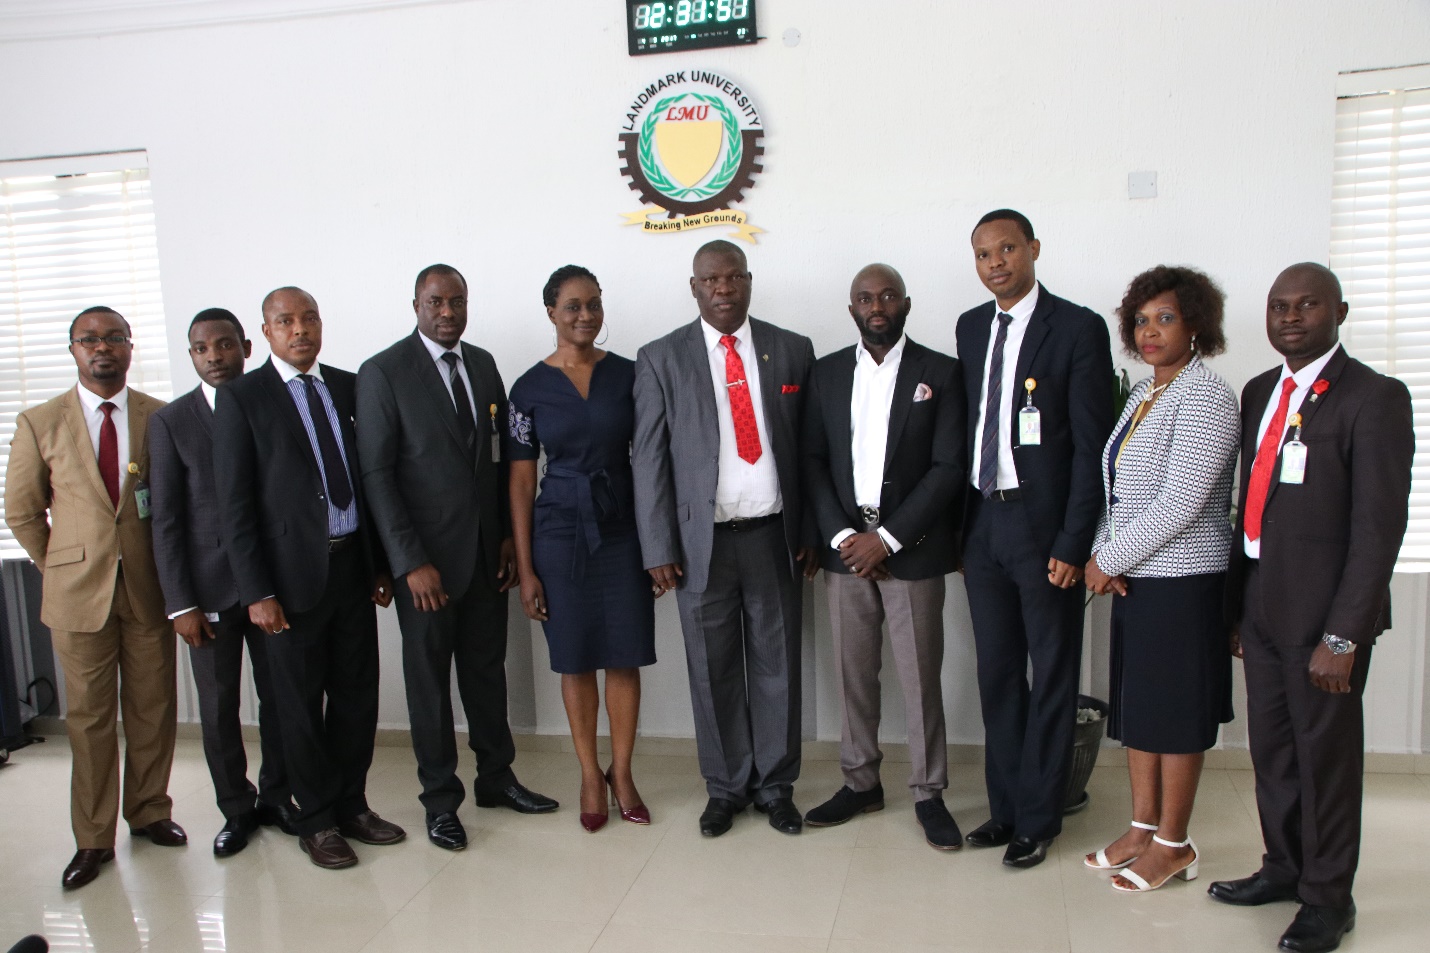 The Iddo Care team in a group photograph with Landmark University Management after the meeting